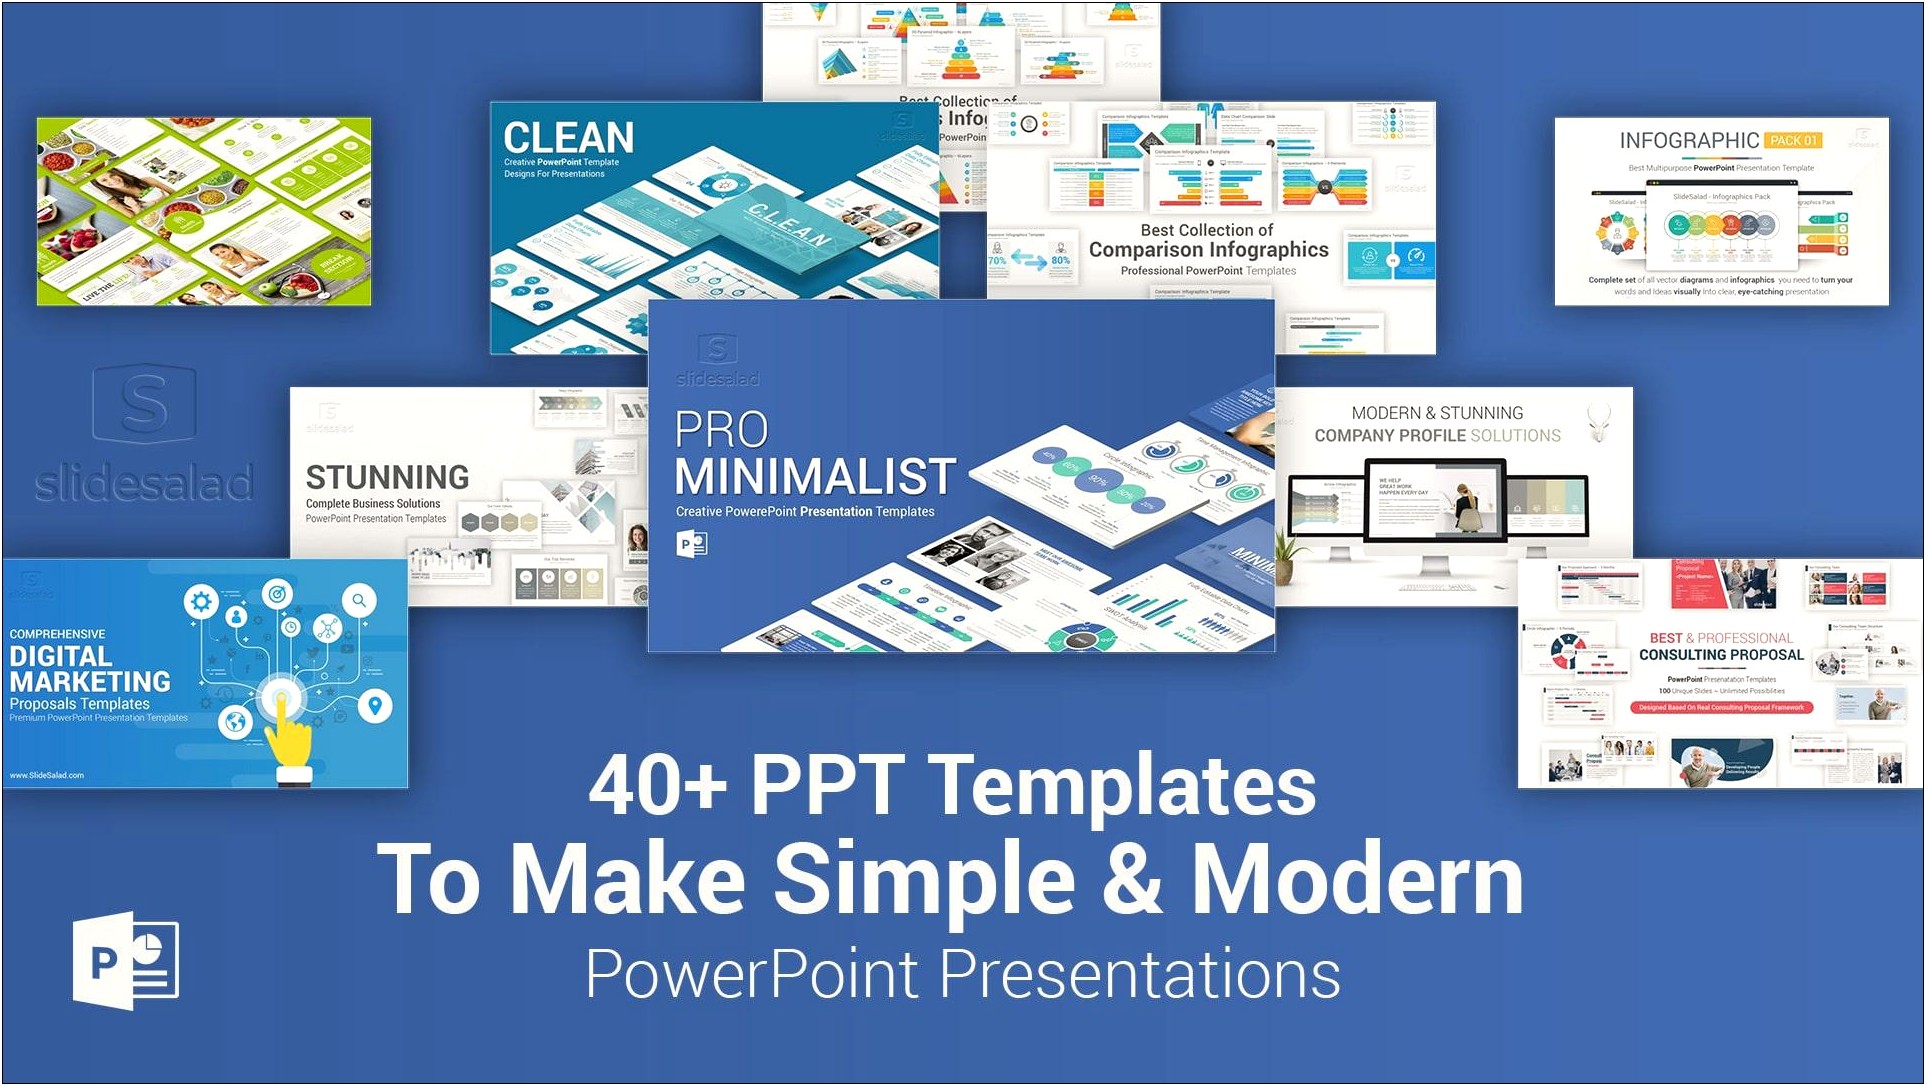 Every Free Minimal Powerpoint And Keynote Template